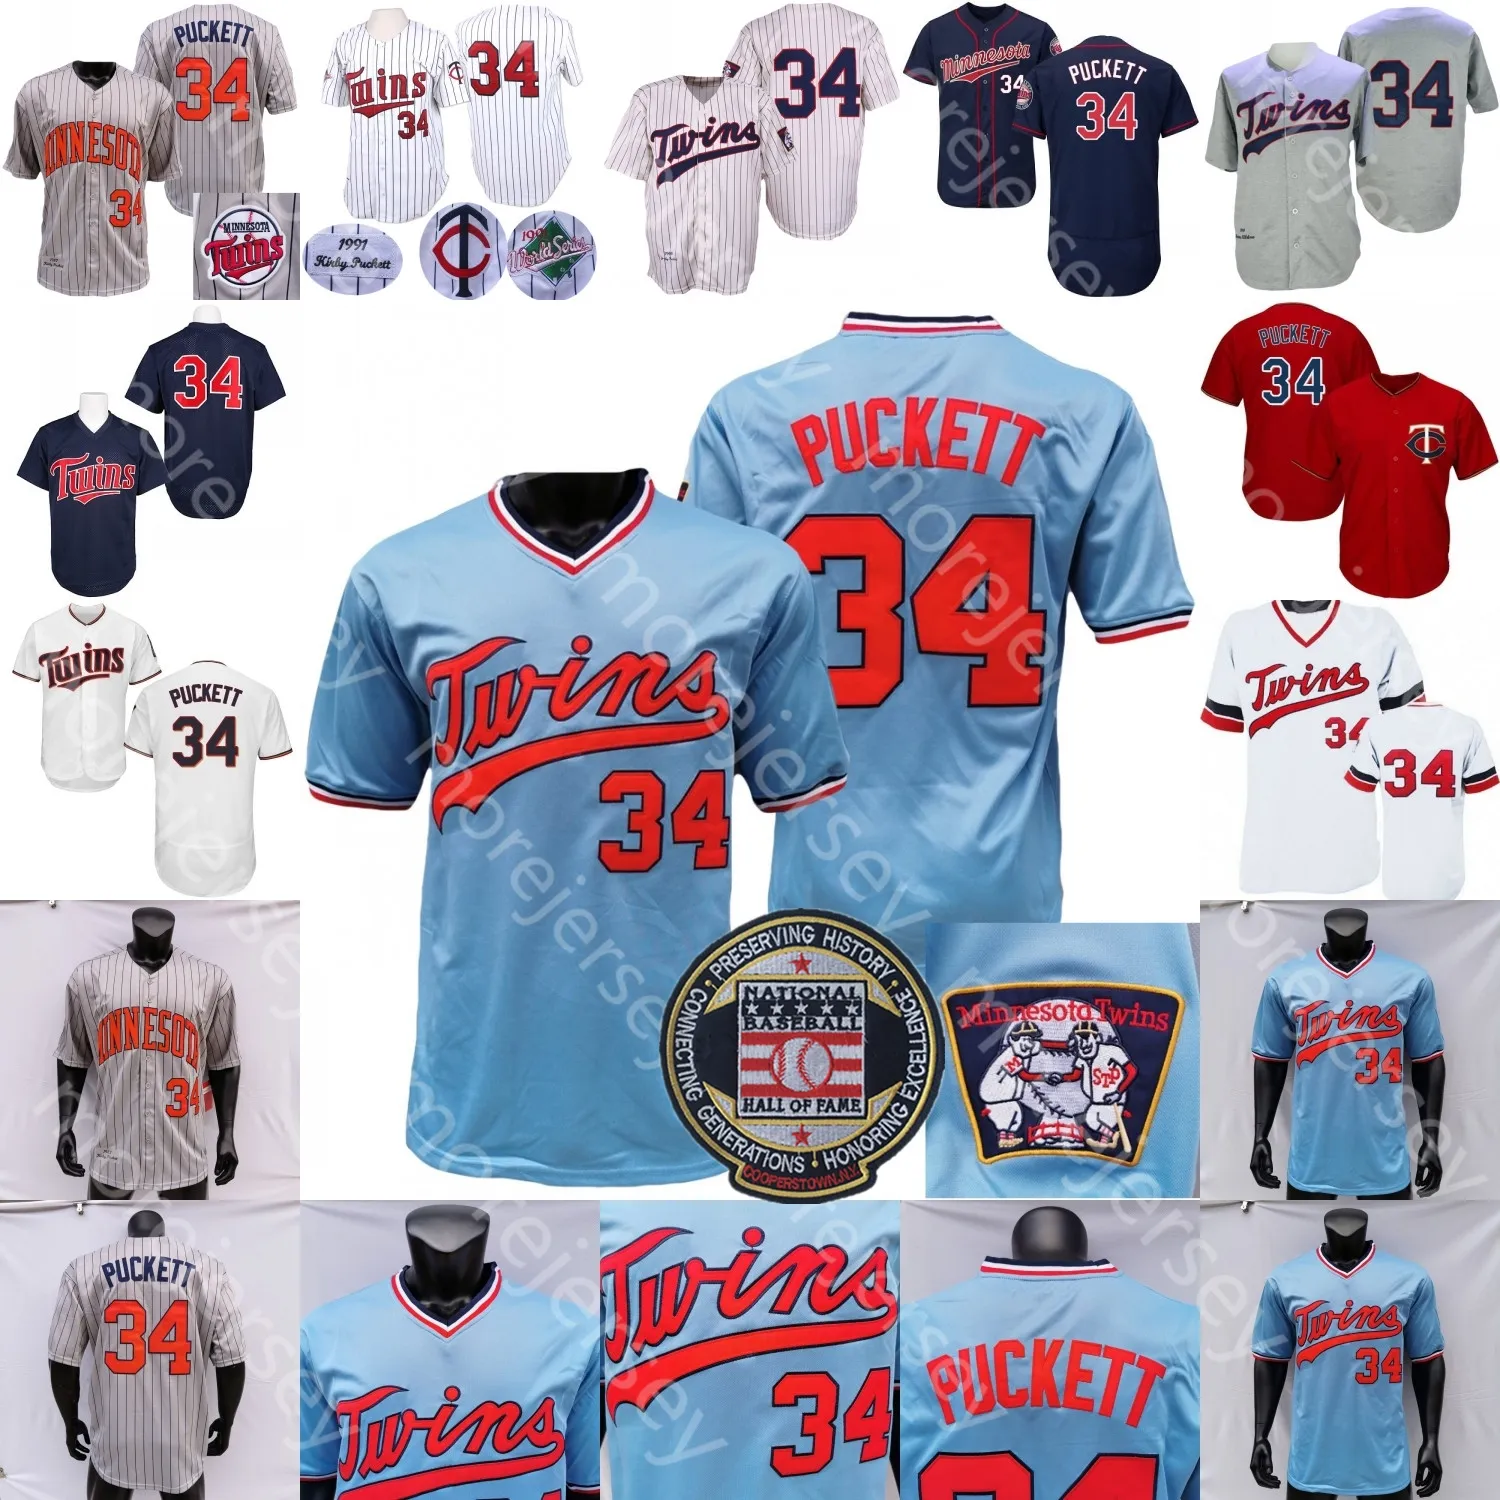 Kirby Puckett Jersey Hall Of Fame Patch 1969 Cream White Pinstripe Grey Coopers-town White Red Player Fans Blue Pullover Salute to Service Navy Mesh BP